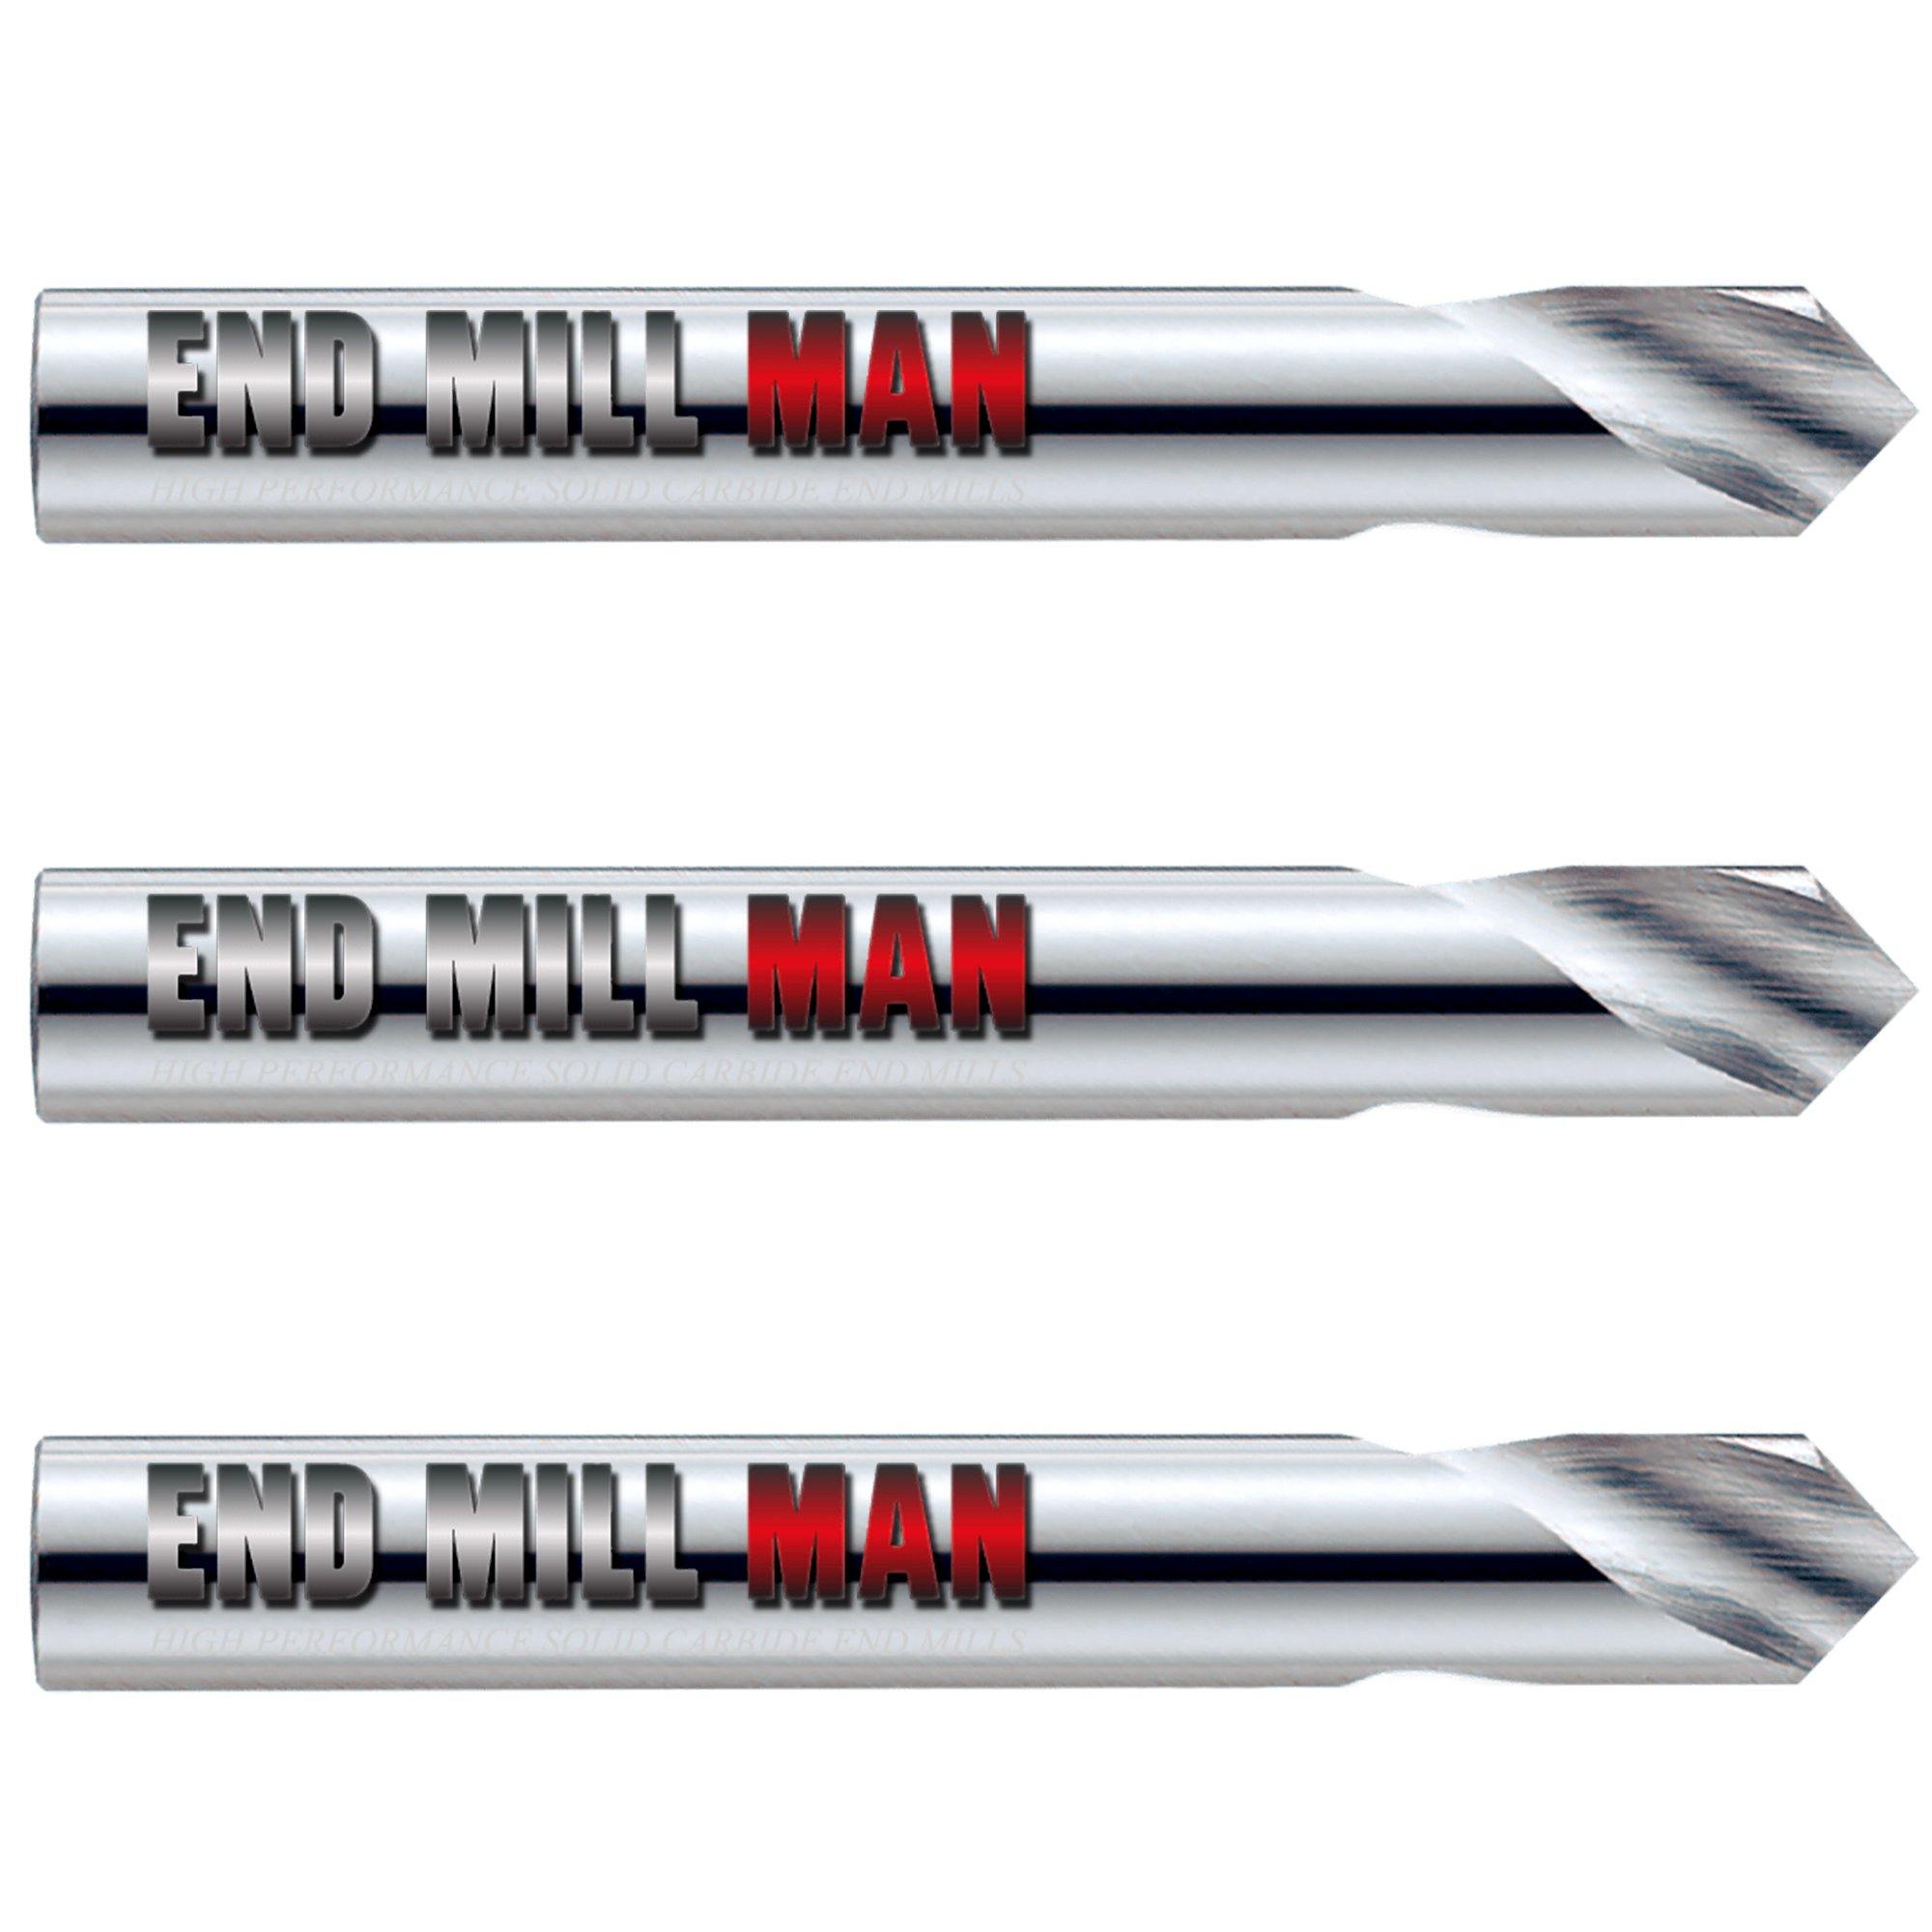 (3 Pack) 3/8" x 1" x 2-1/2" Carbide Spotting Drills - The End Mill Store 